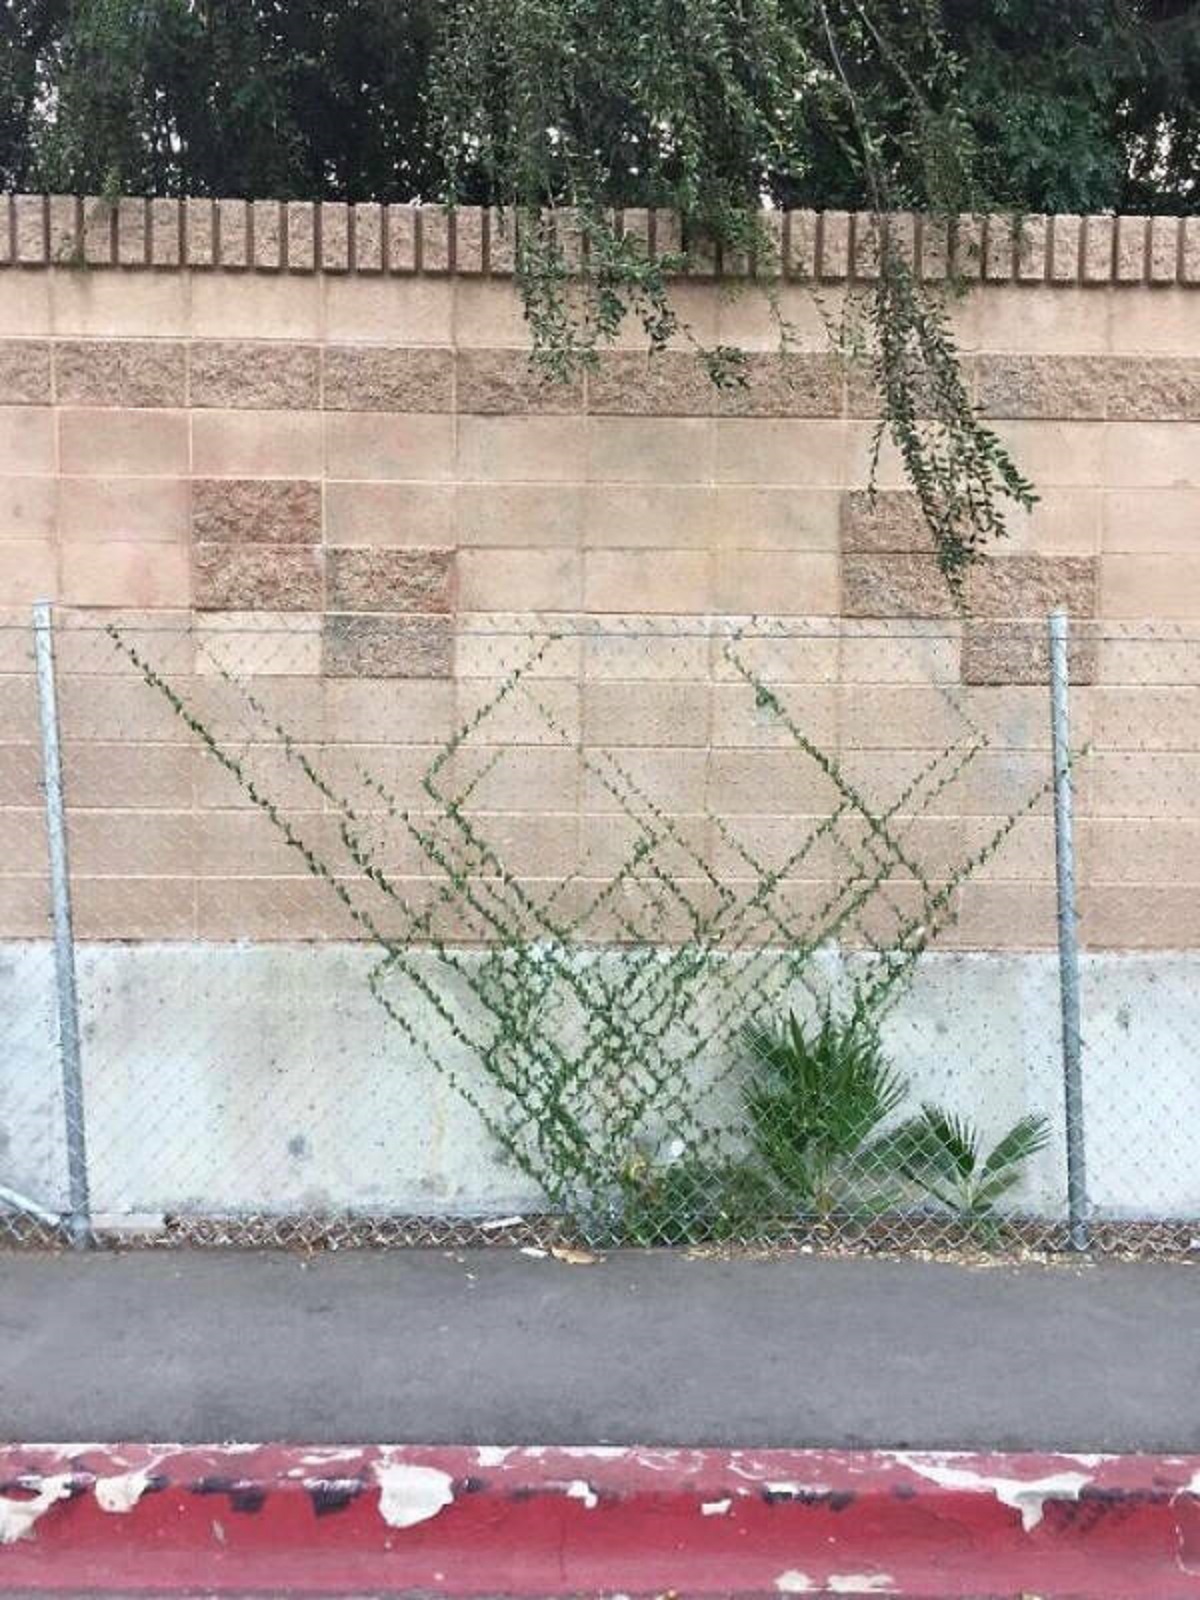 “This plant growing along the chains of a fence”